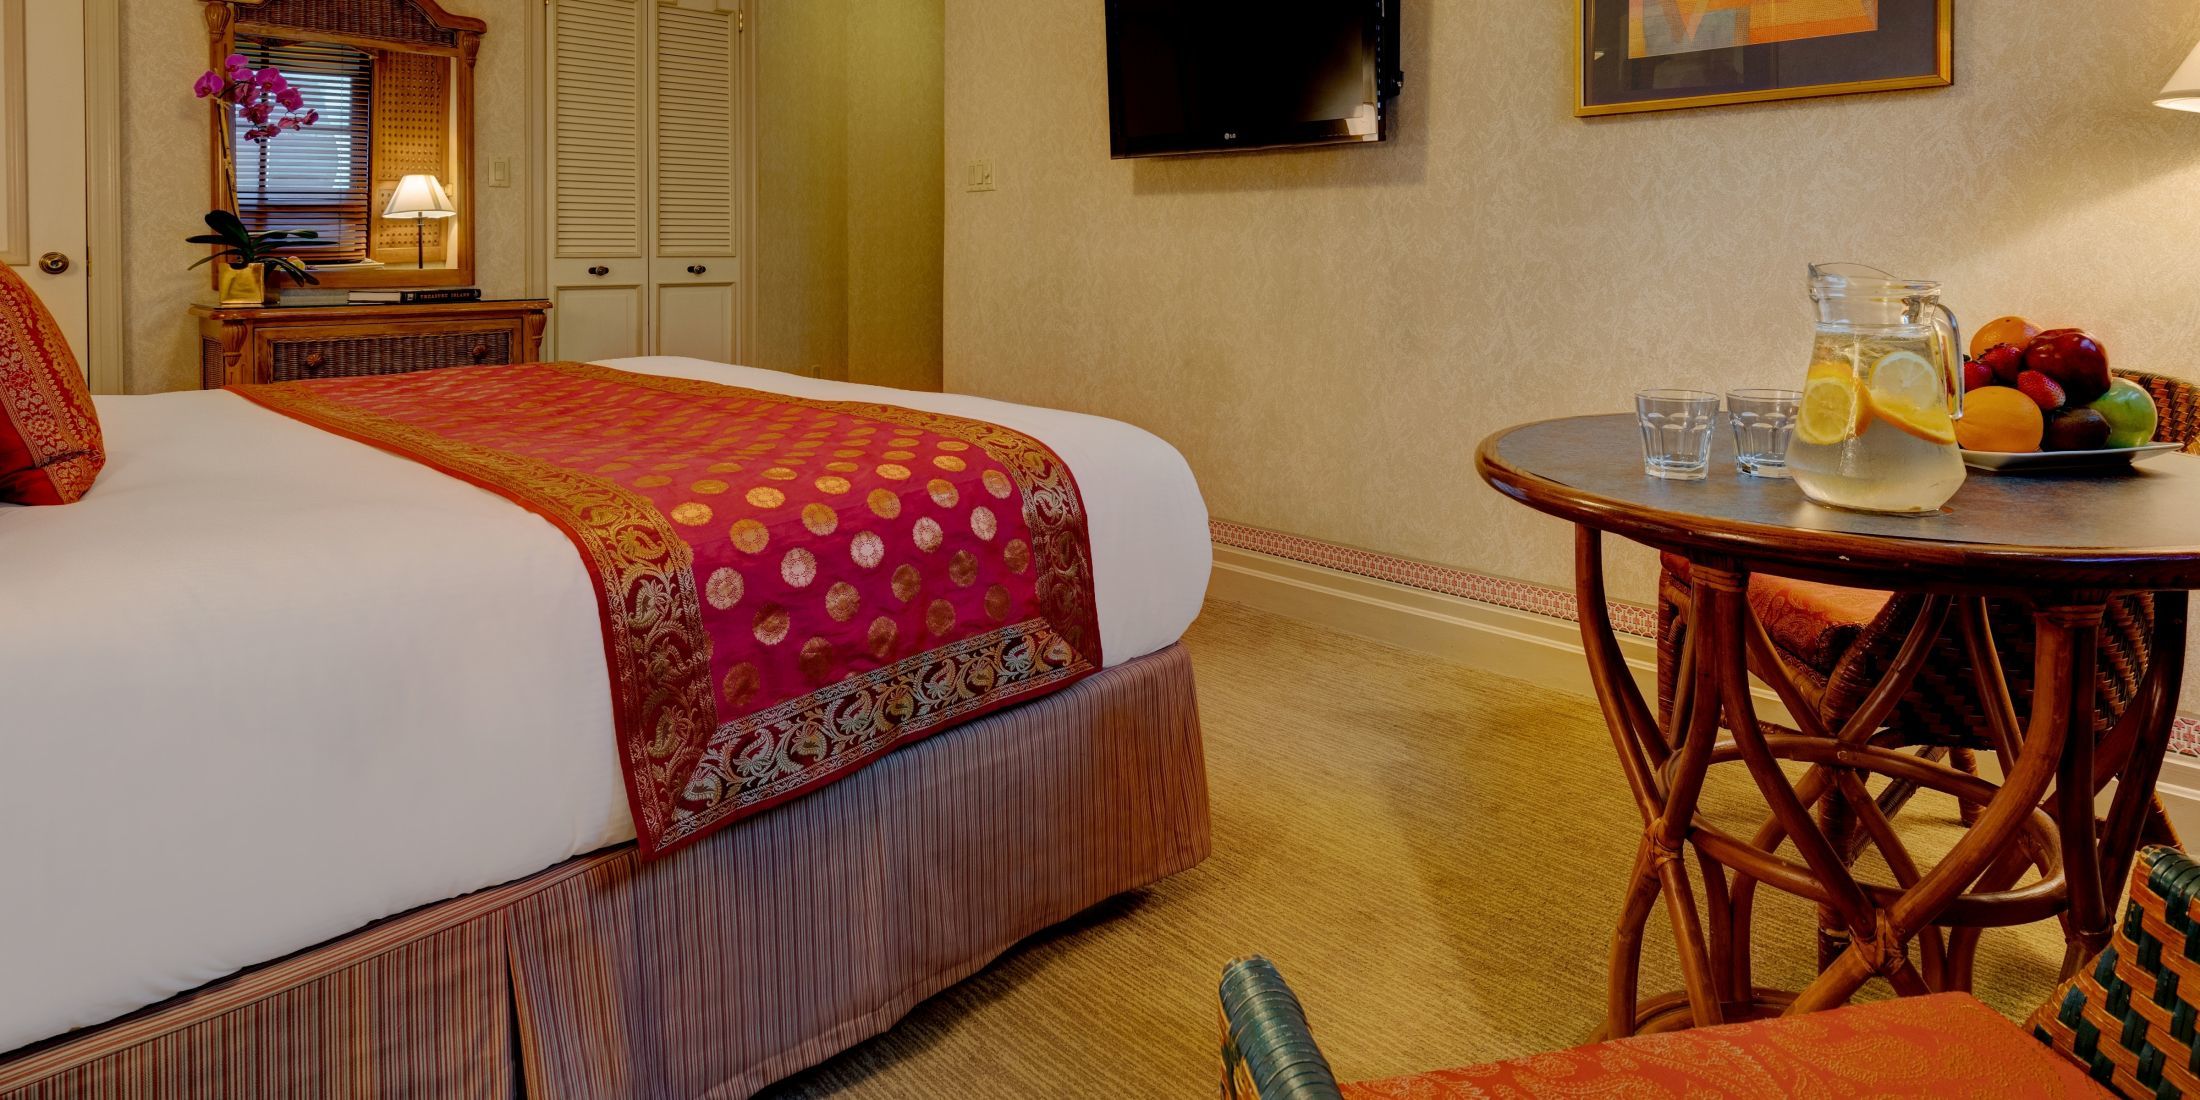 Premium Rooms with 1 King Sized bed are approximately 275 square feet with bistro table and 2 chairs.